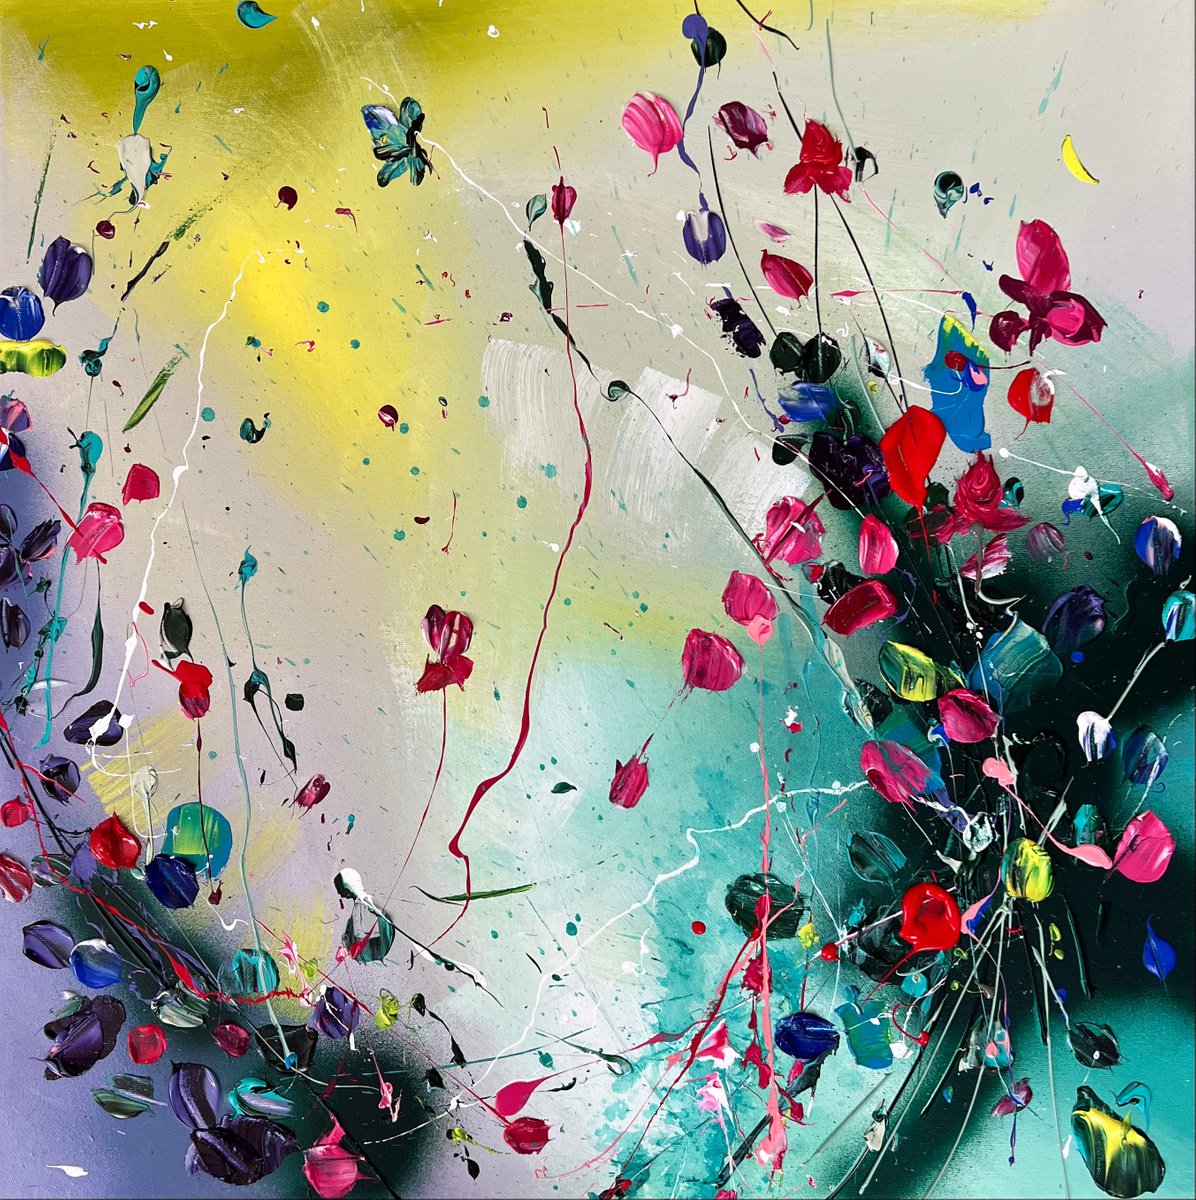 Structure impasto acrylic painting with abstract flowers 60x60cm Shiny Raindrops by Anastassia Skopp